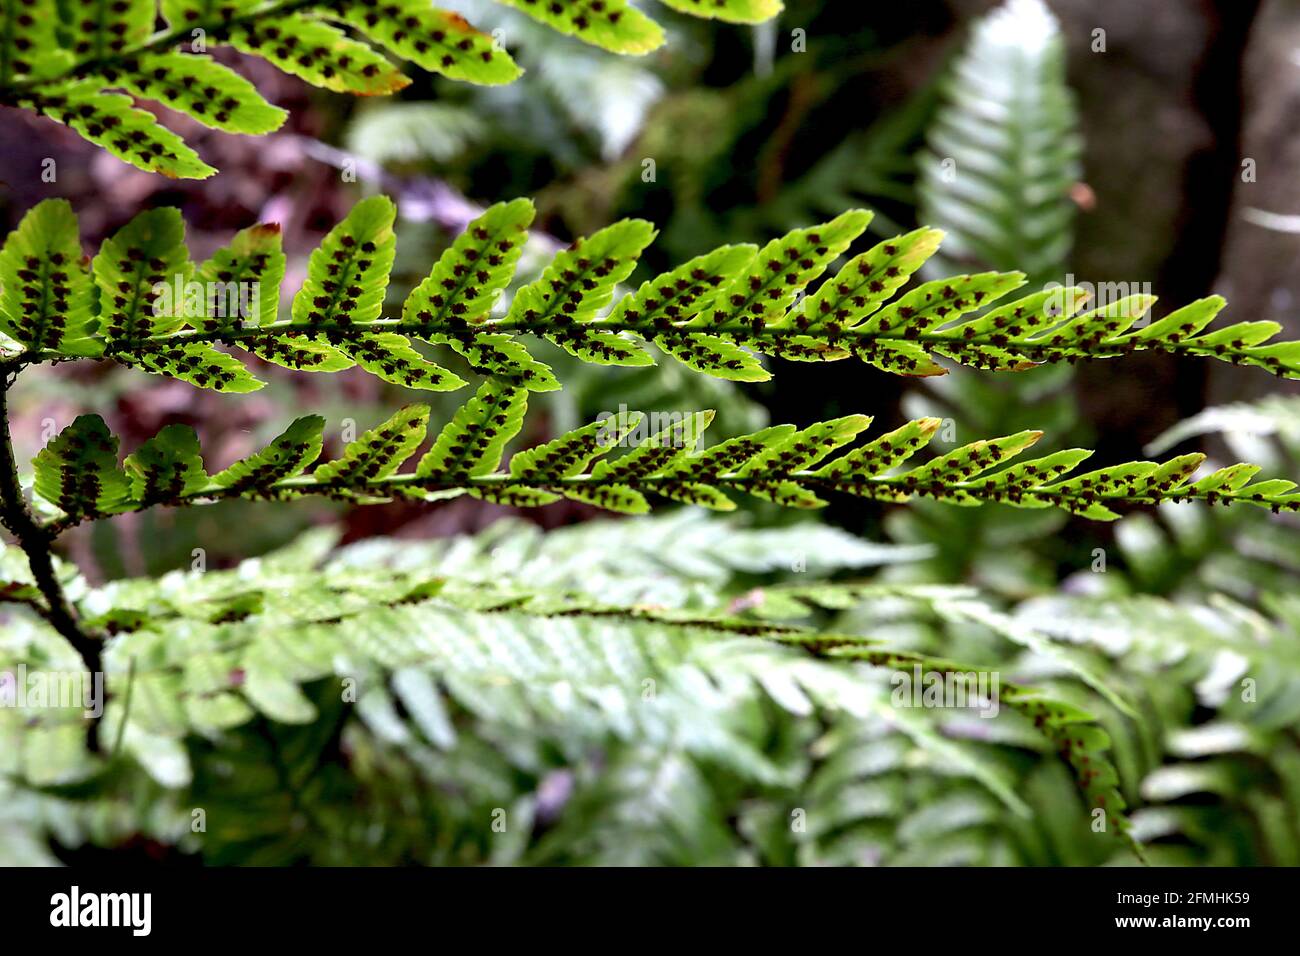 Athyrium filix femina ssp asplenioides Southern lady fern – brown spores on the underside of fronds,  May, England, UK Stock Photo